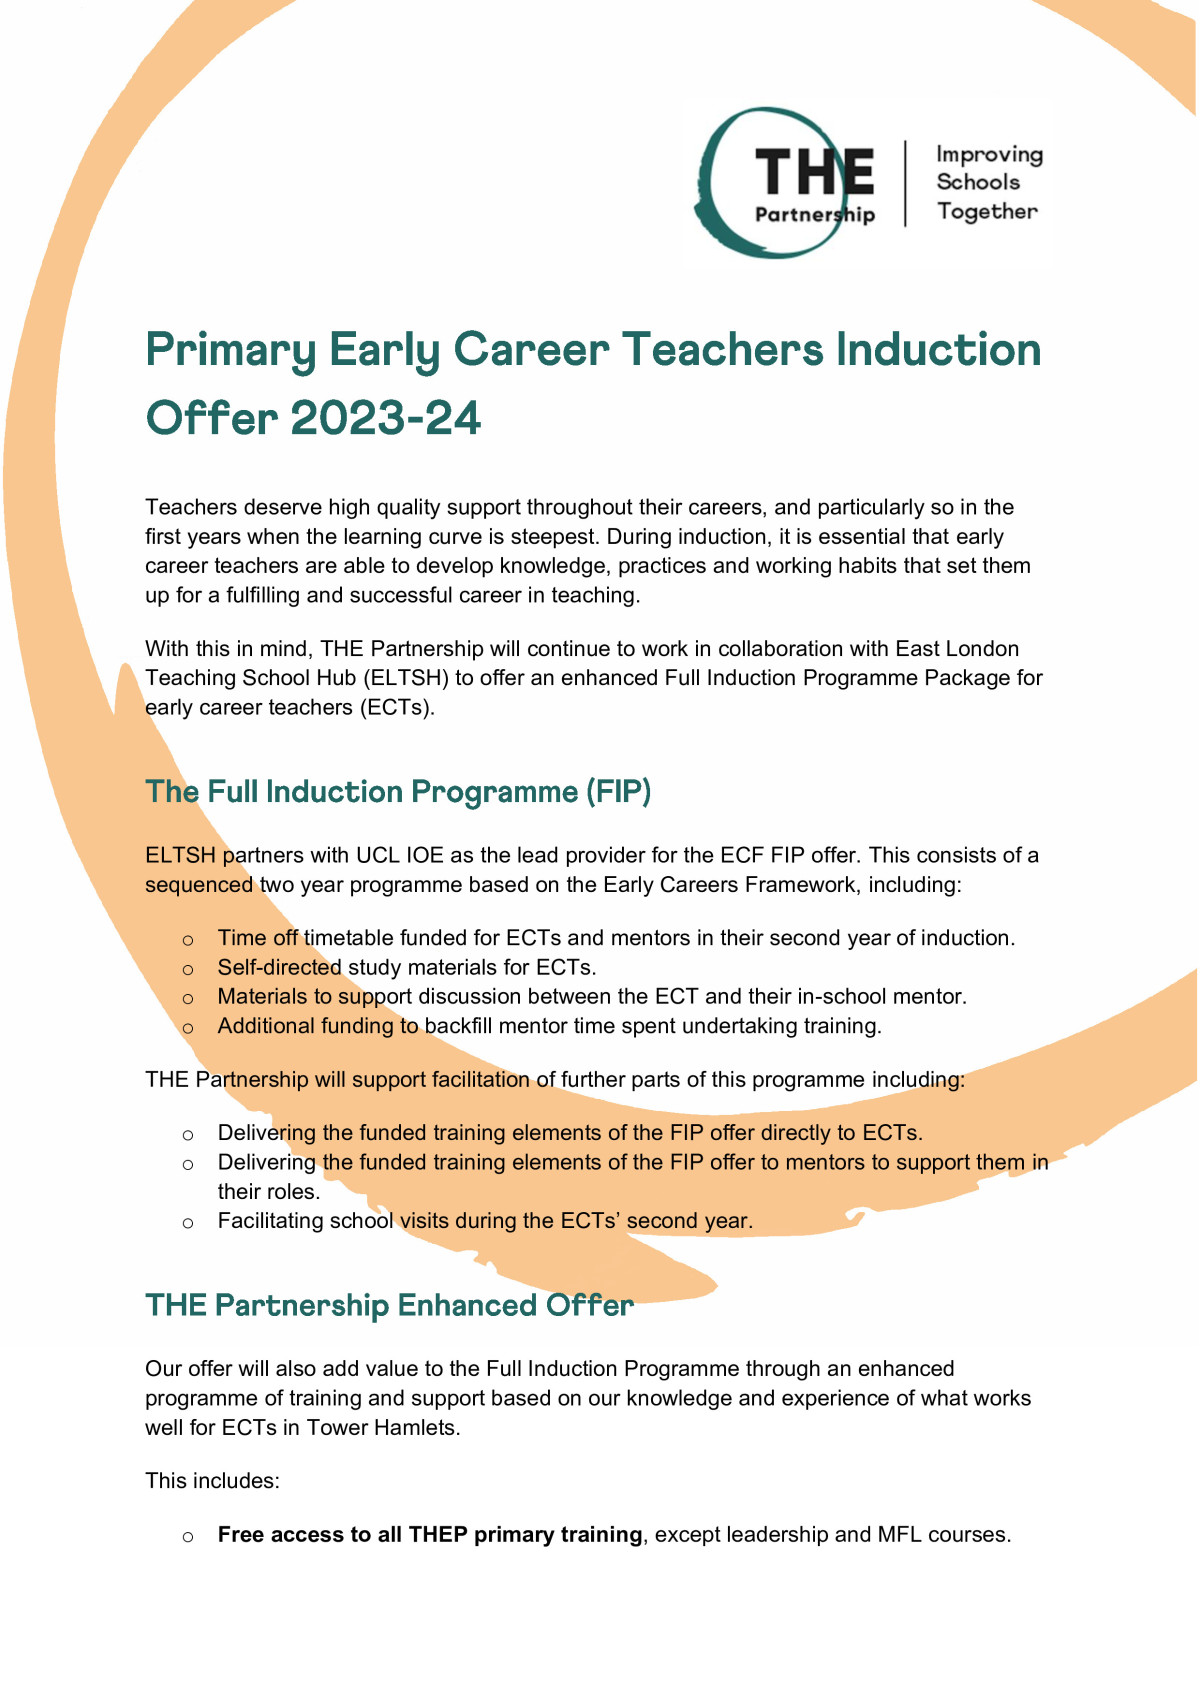 Early careers programmes